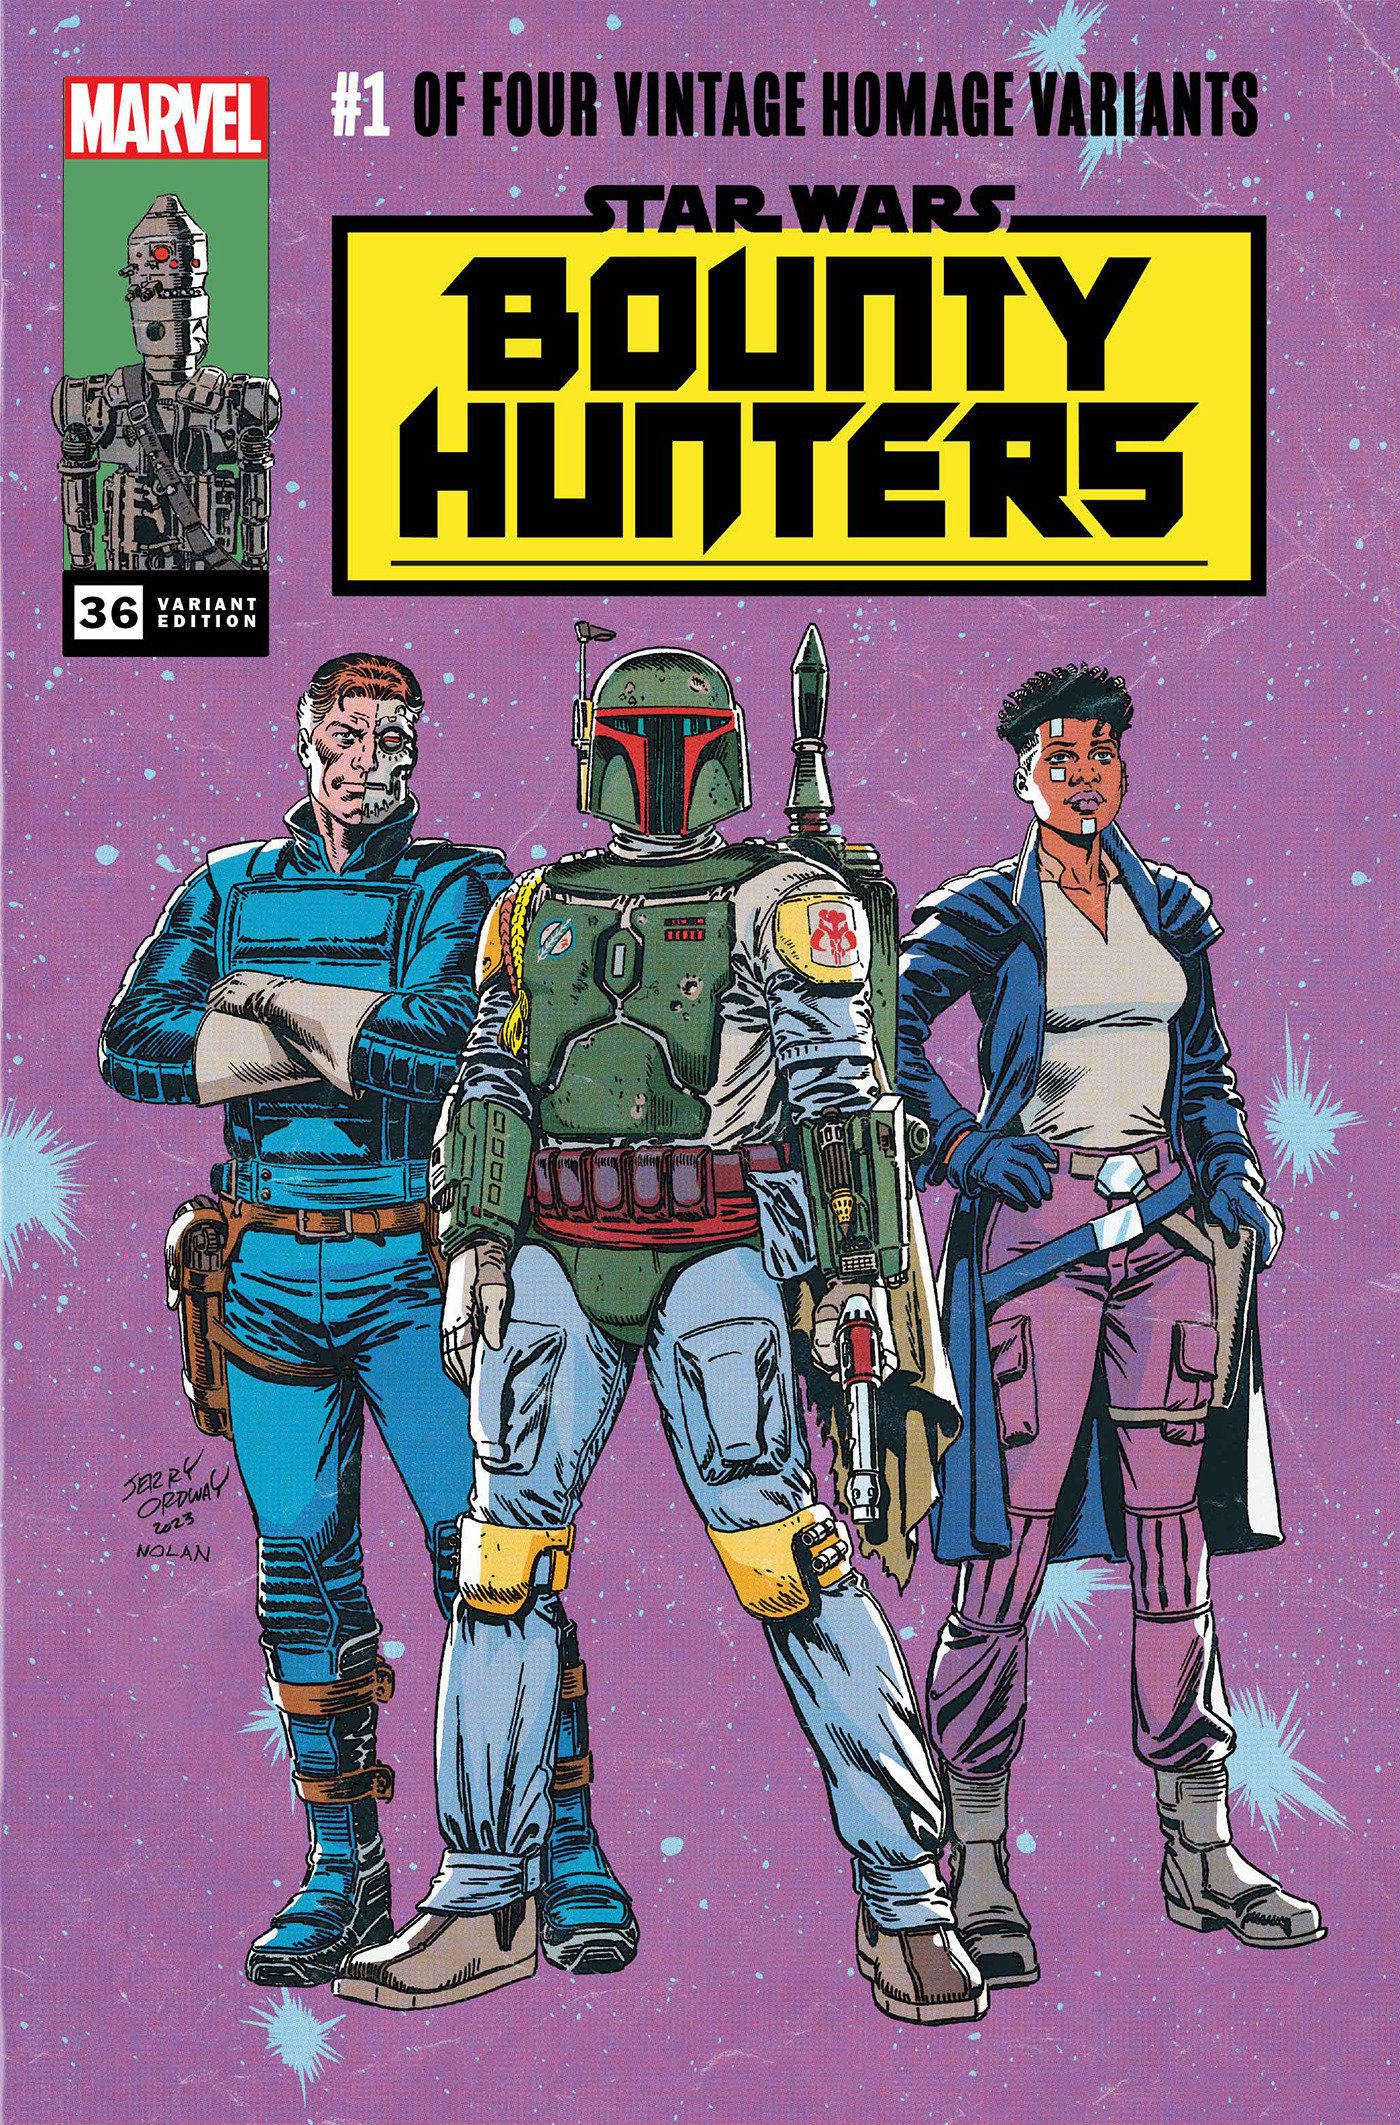 Star Wars: Bounty Hunters #36 Jerry Ordway Classic Trade Dress Variant